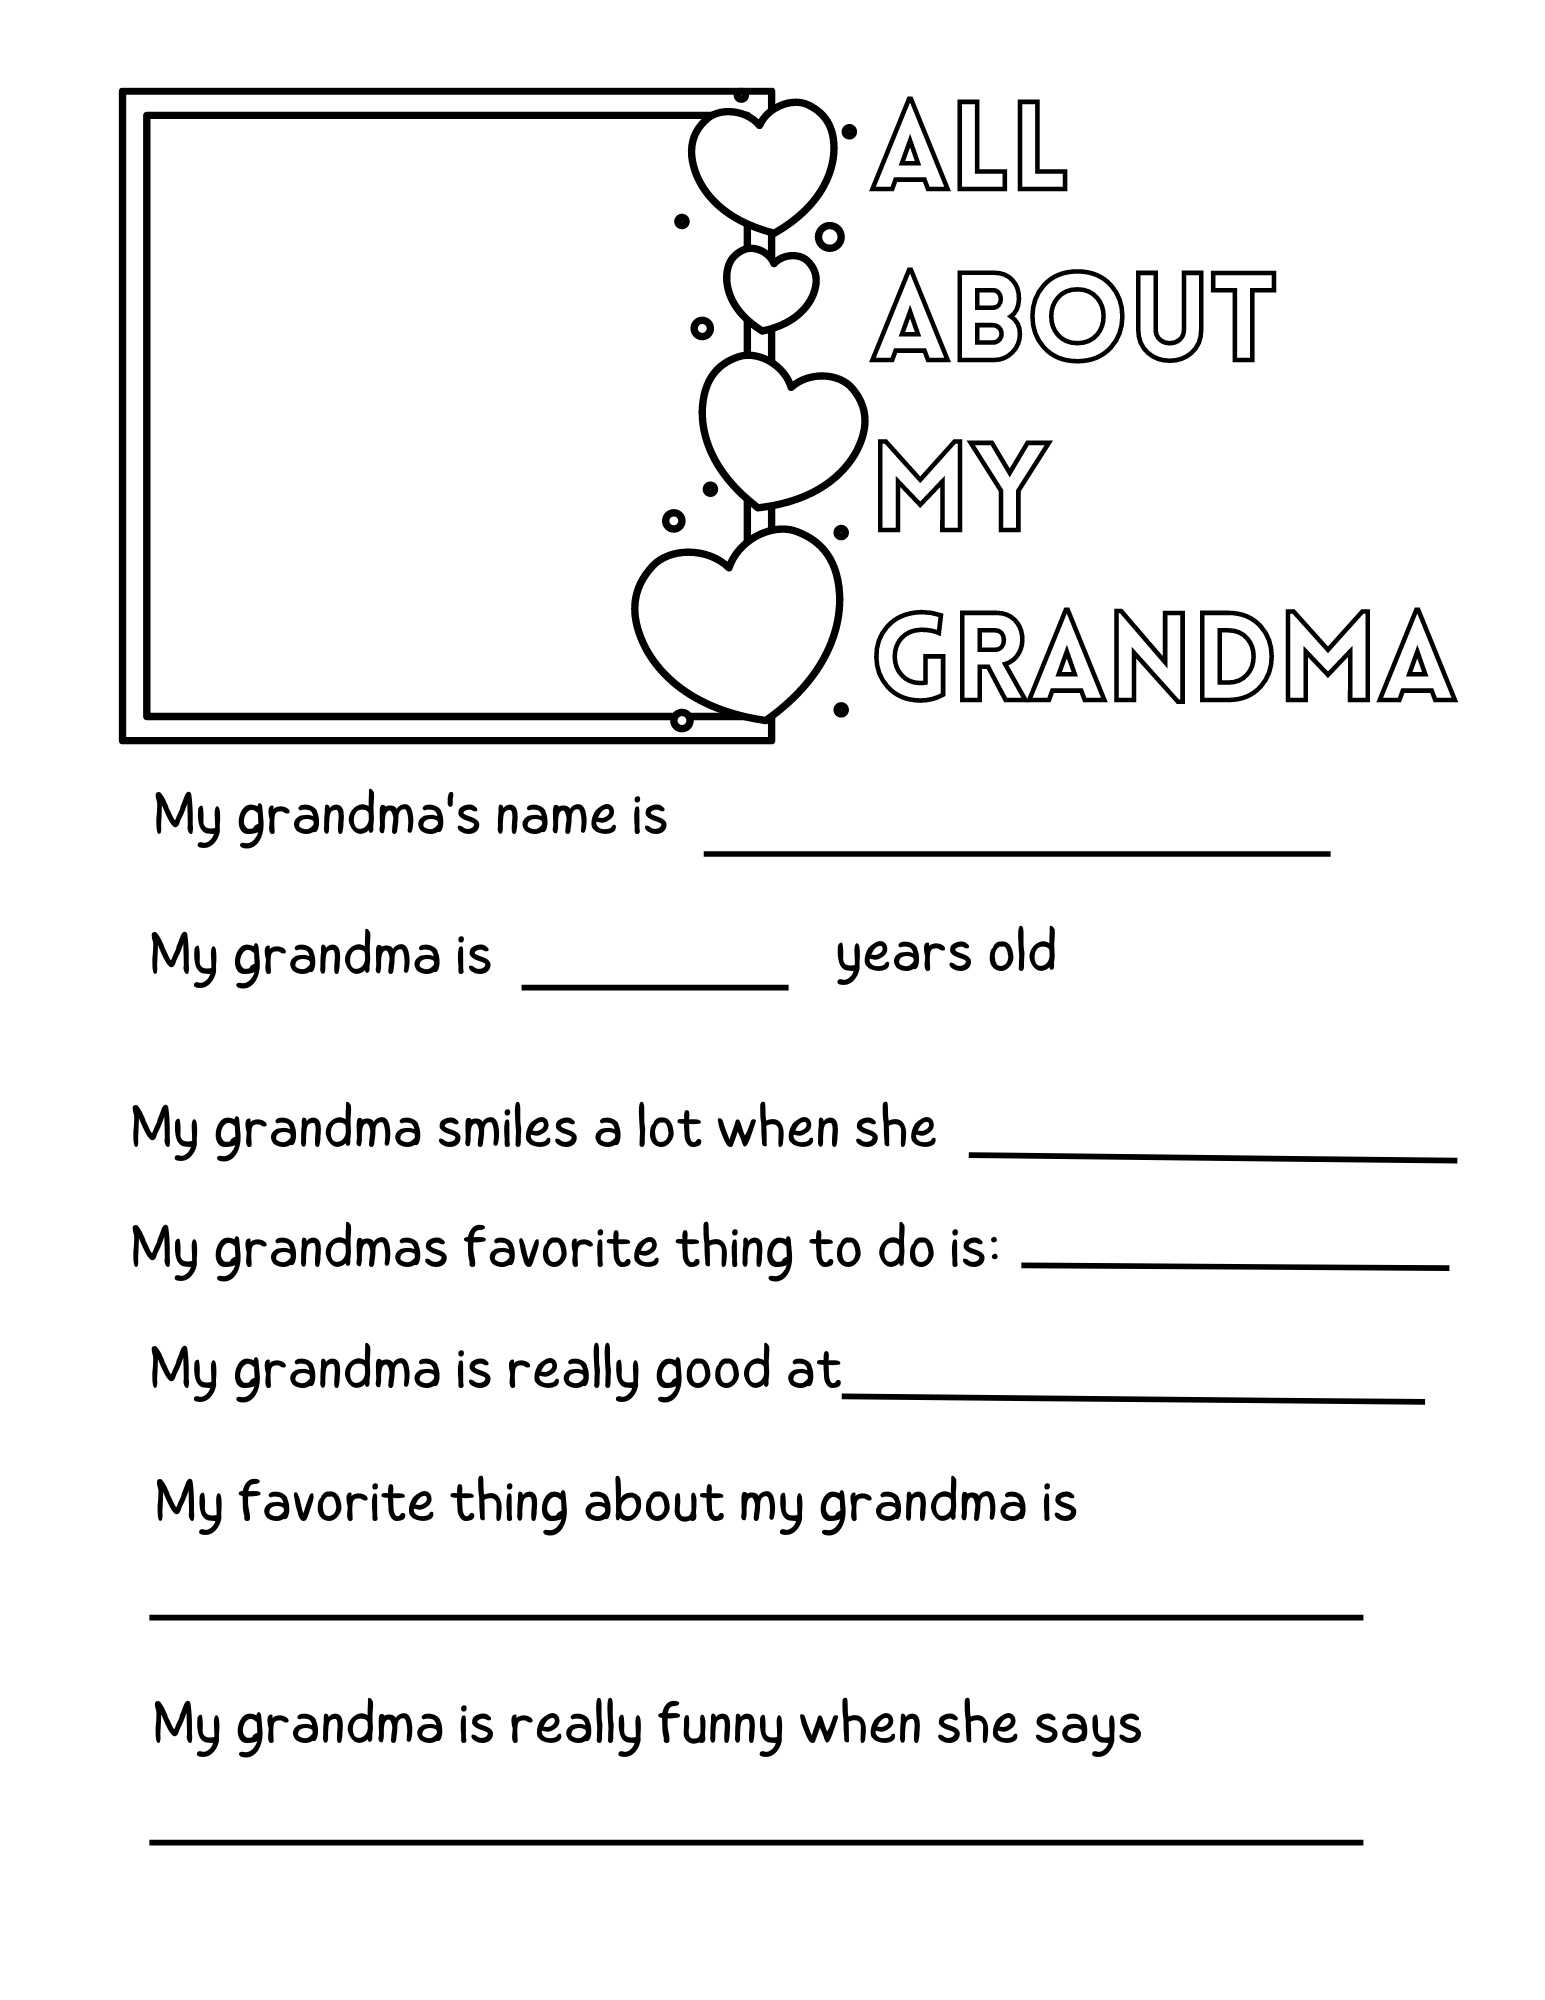 Mothers Day Grandma Questionnaire Printable